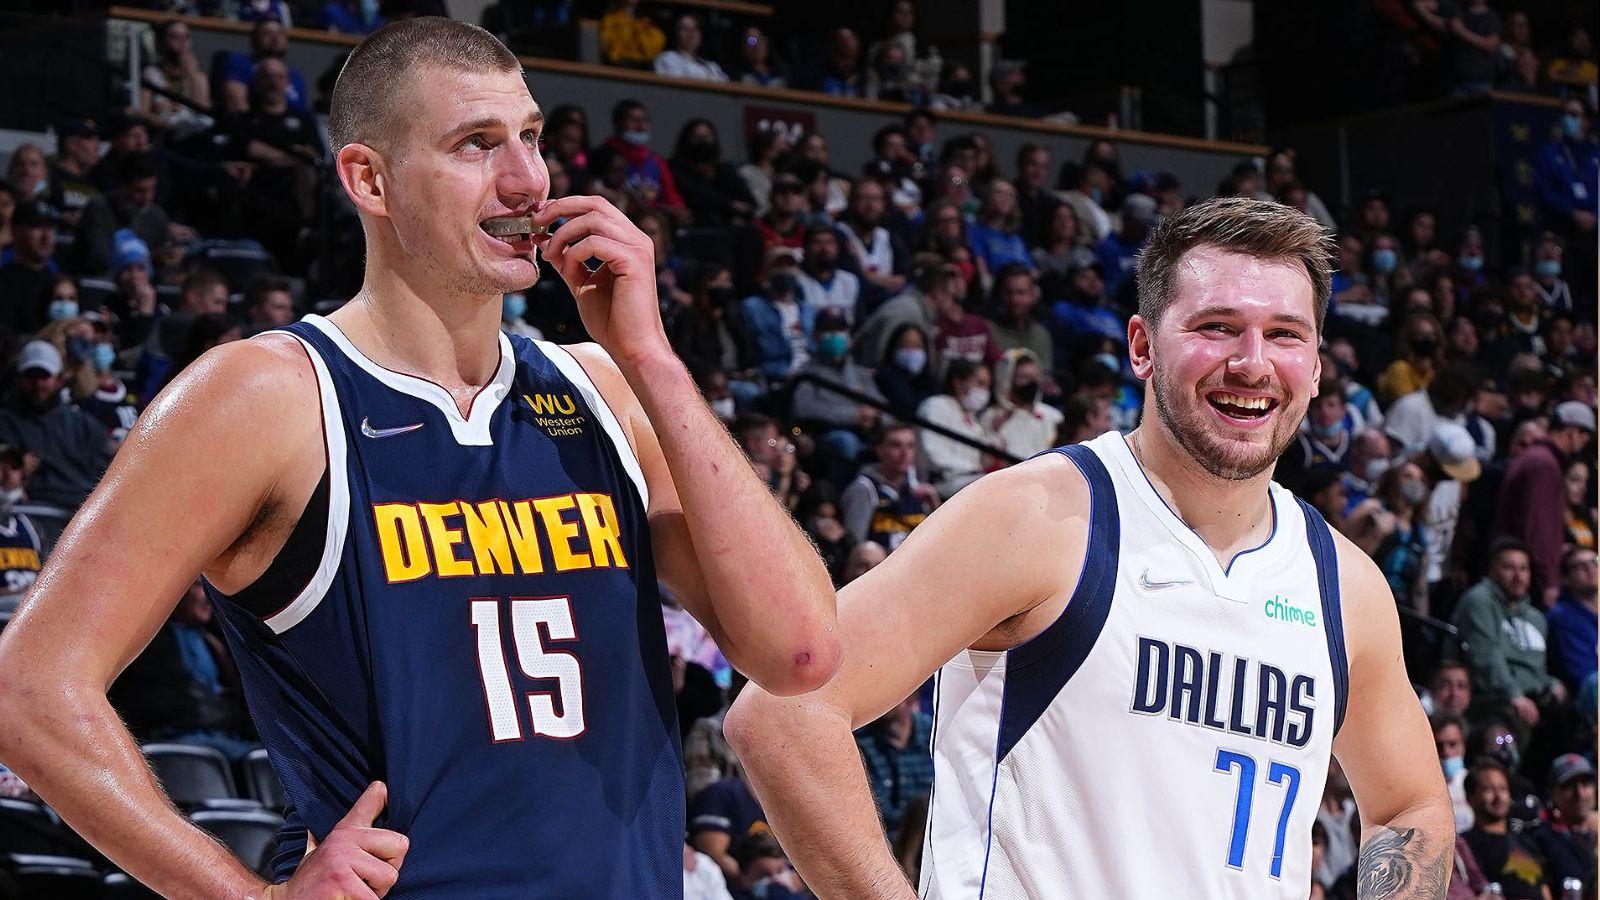 Nikola Jokic (left) and Luka Doncic (right share the floor during free throws.